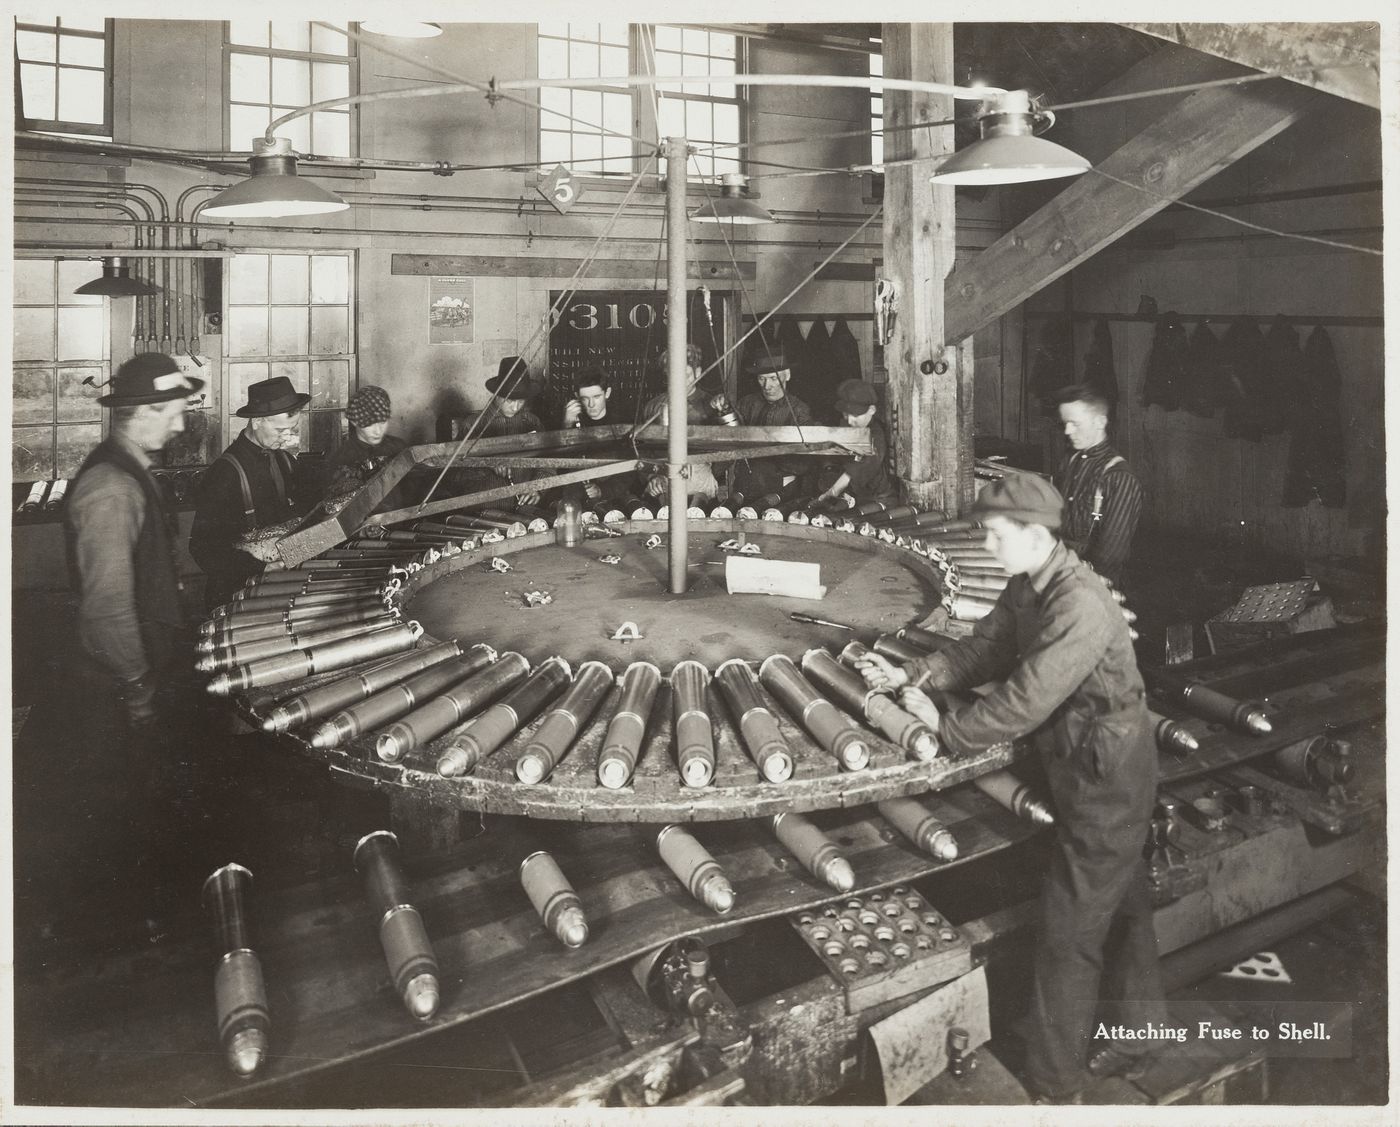 Interior view of workers attaching fuses to shells at the Energite Explosives Plant No. 3, the Shell Loading Plant, Renfrew, Ontario, Canada